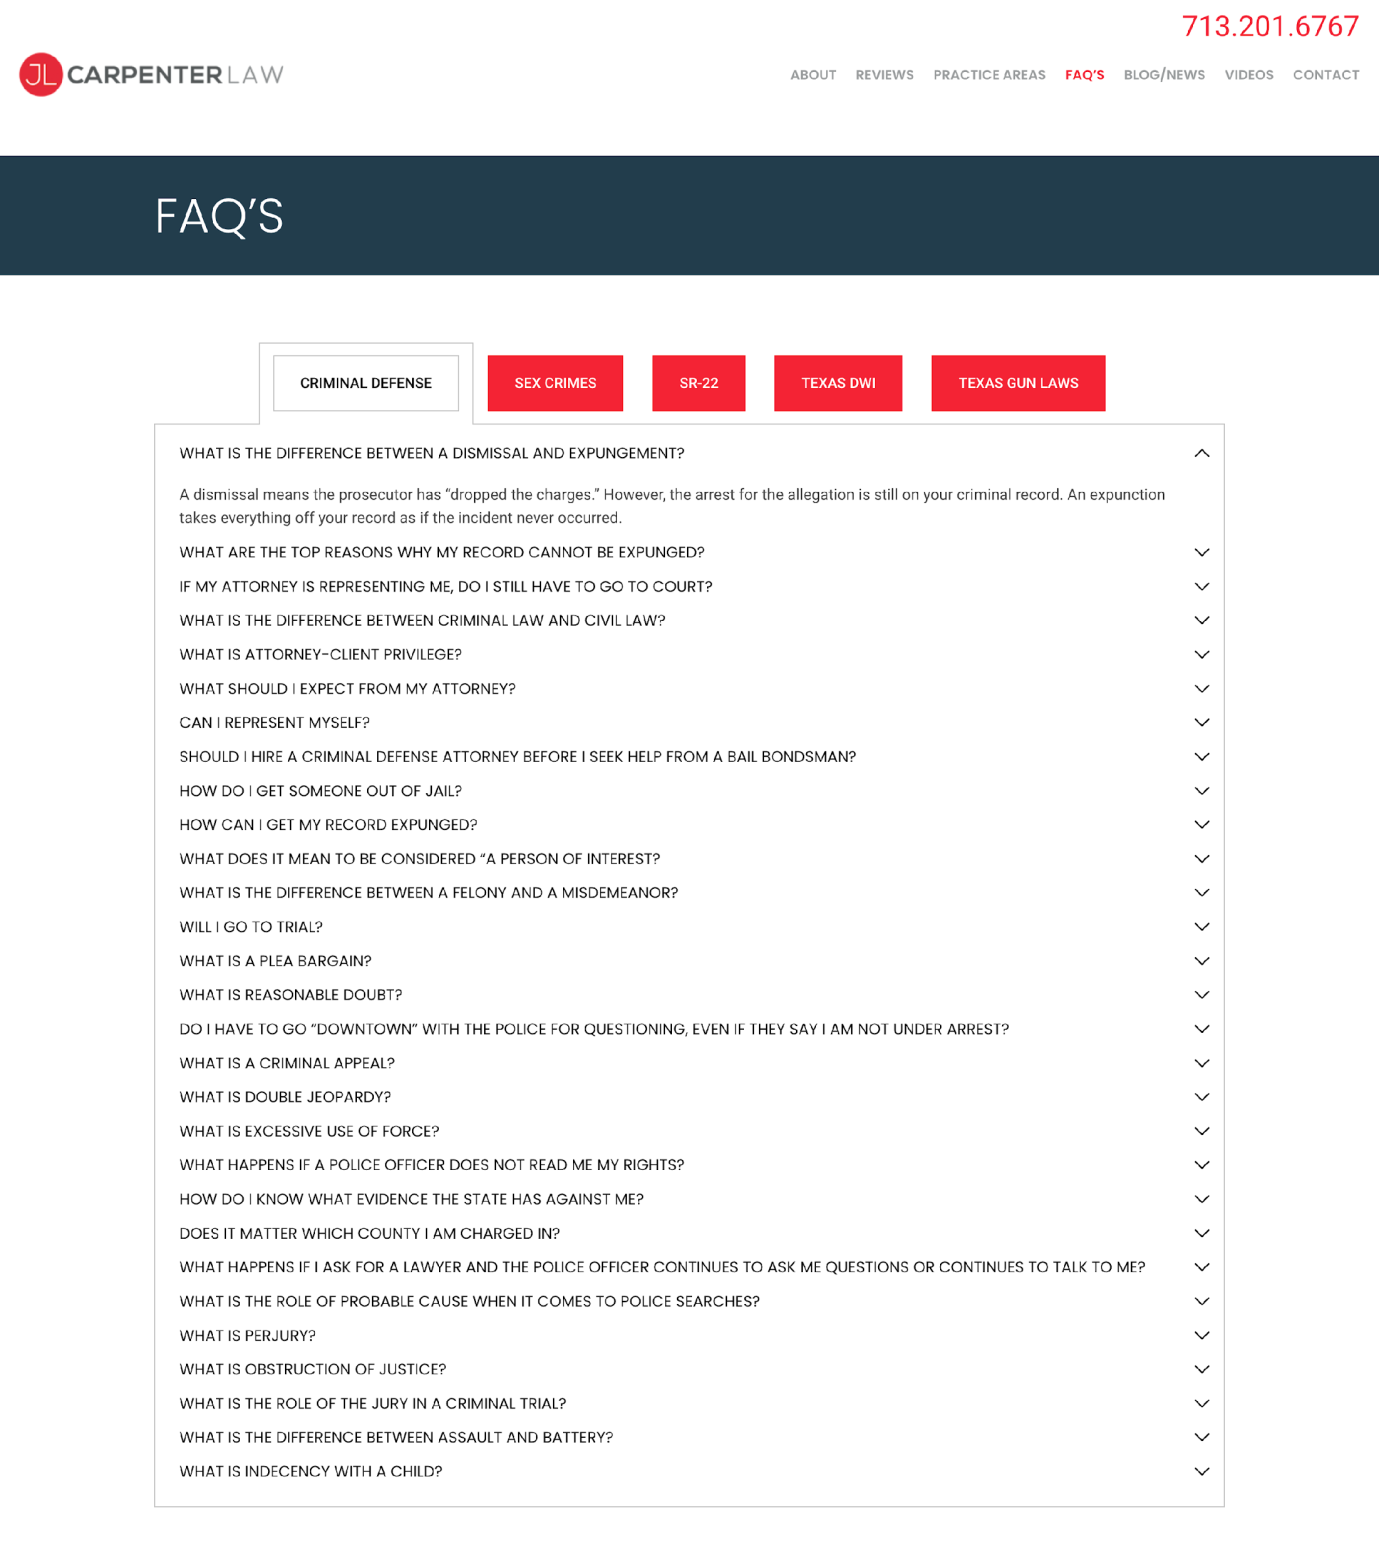 JL Carpenter's FAQs page from website